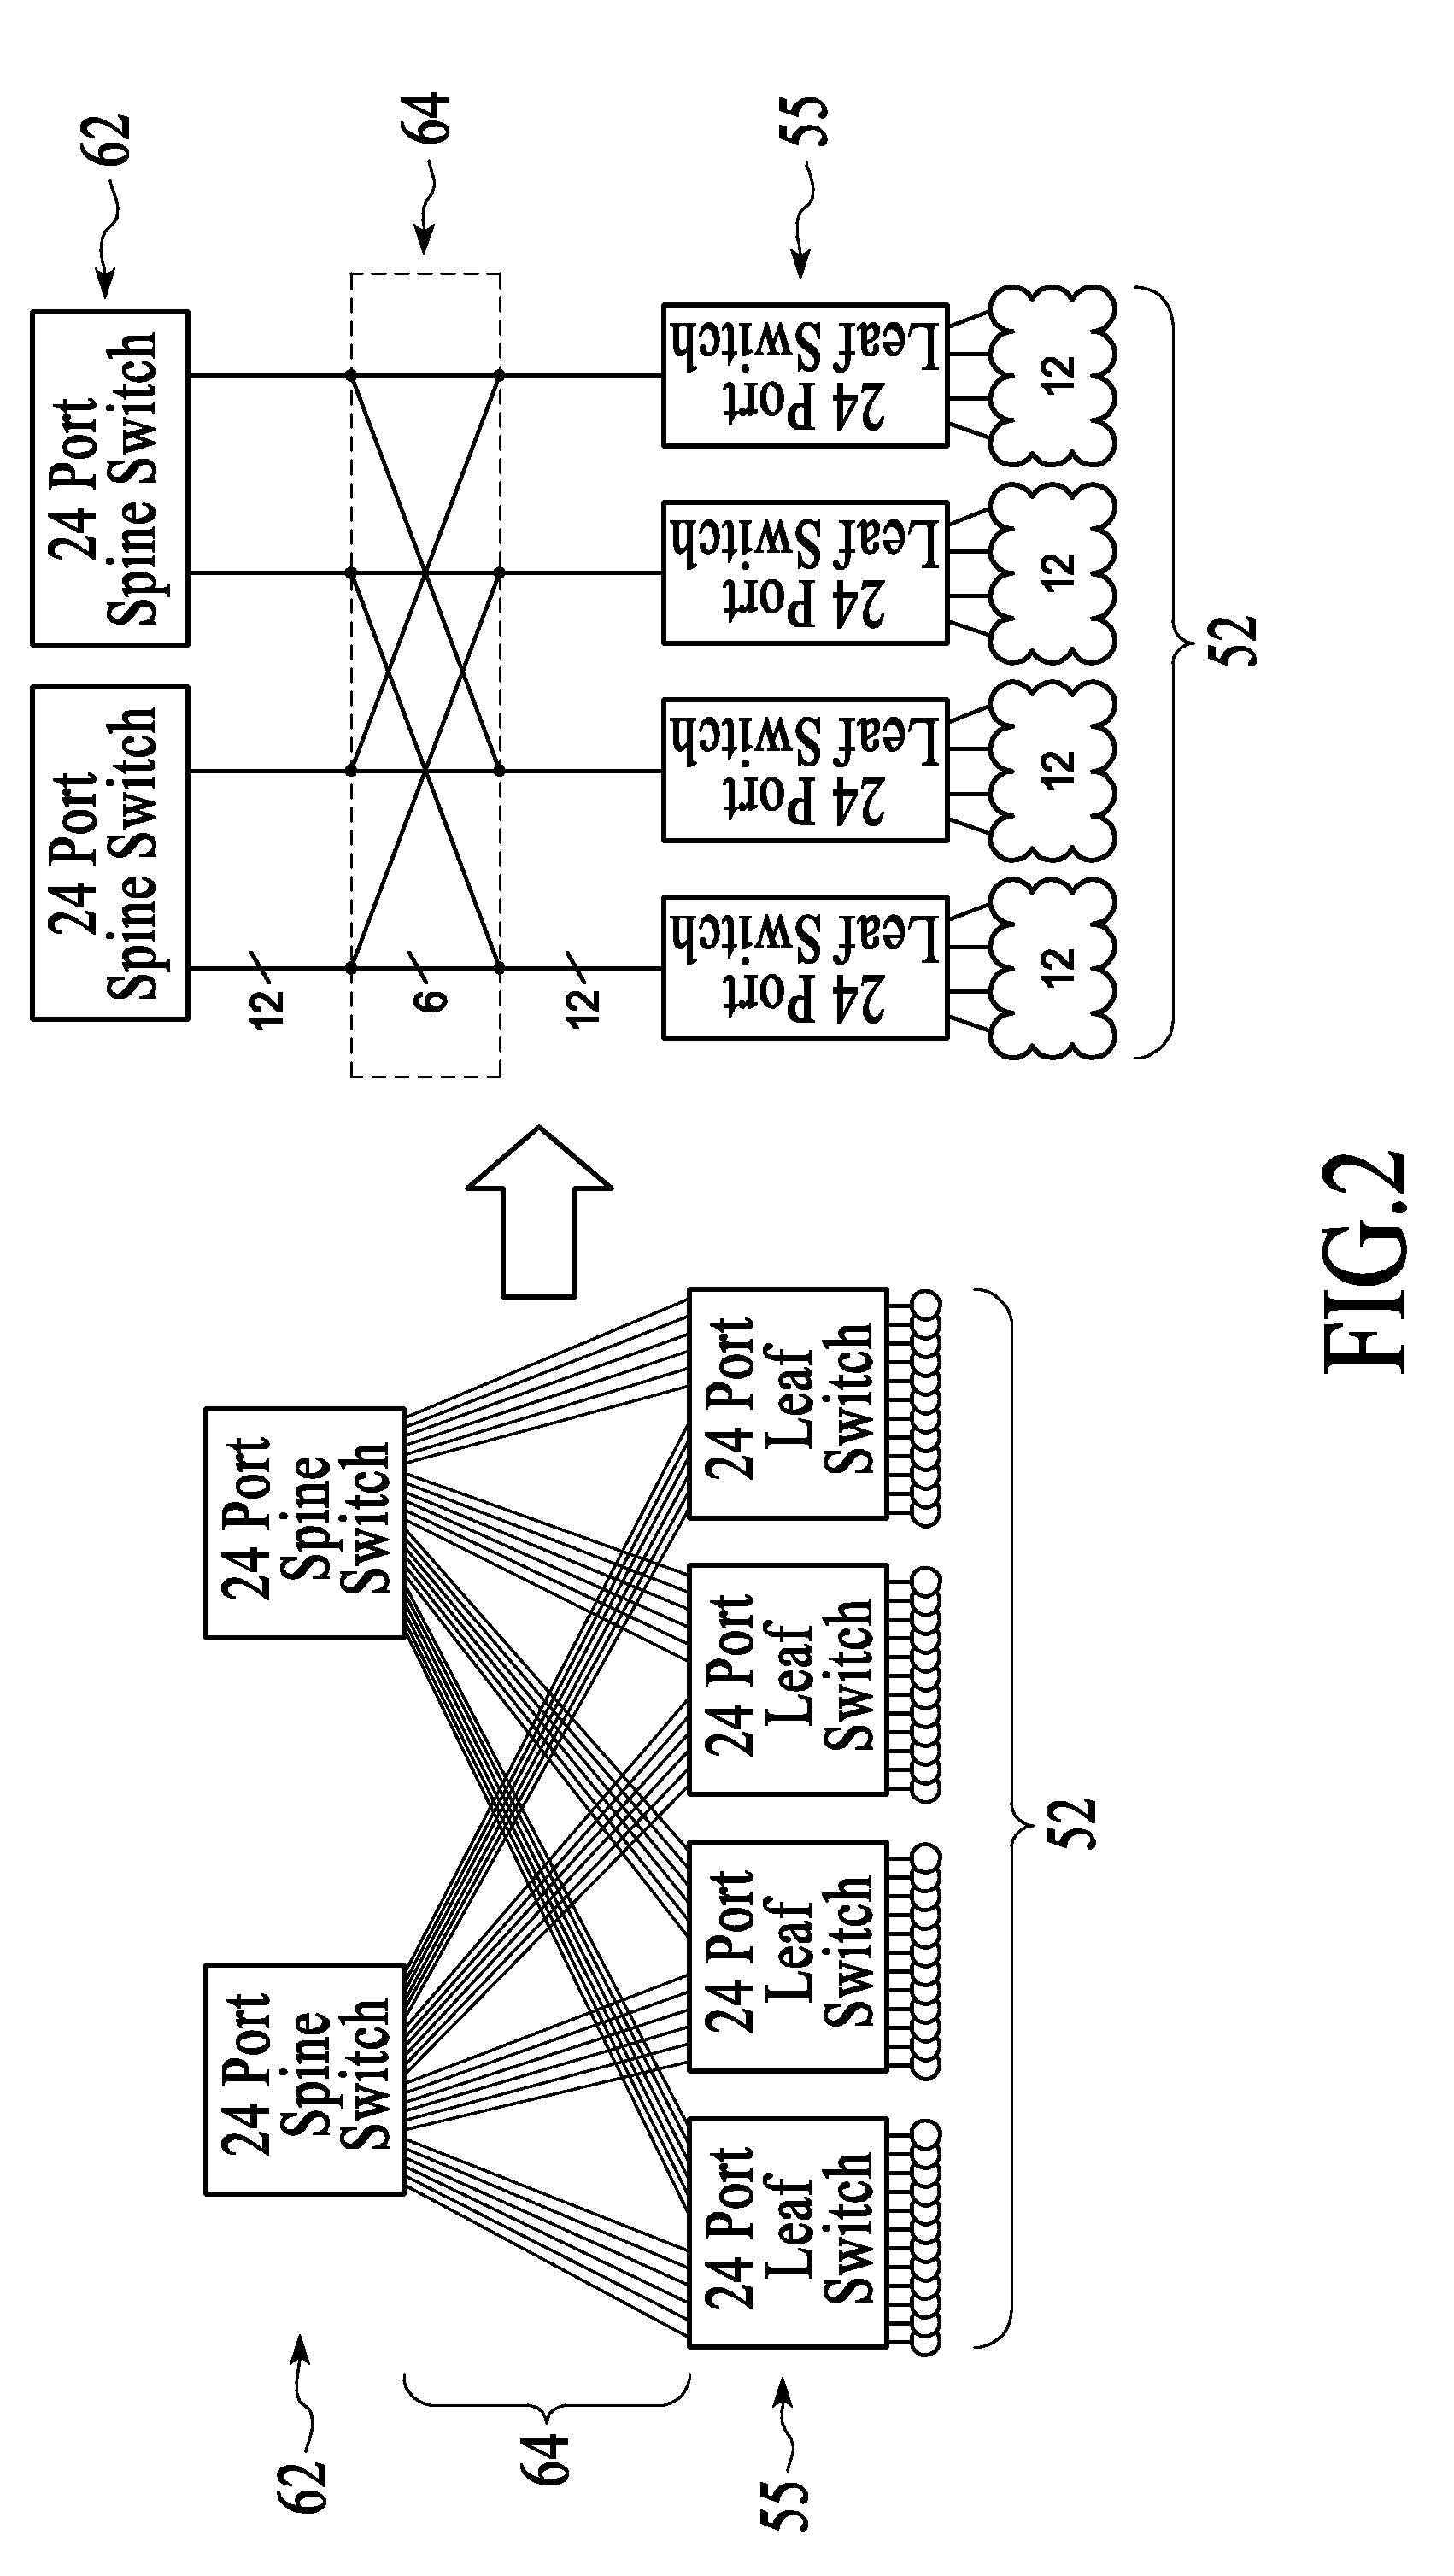 Optical Network for Cluster Computing